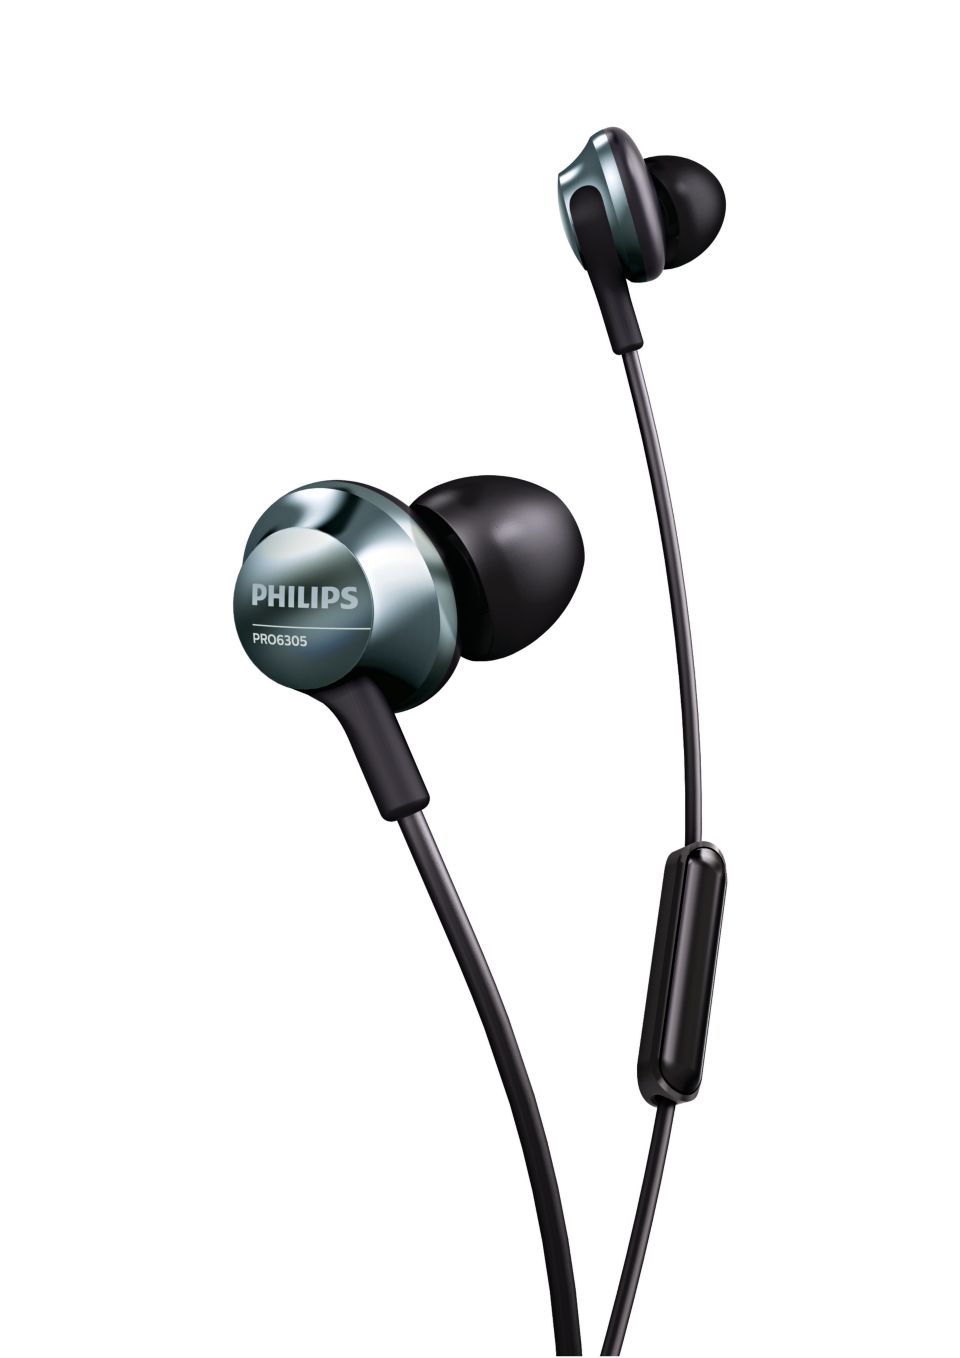 Philips Auriculares intrauditivos con cable - Negro